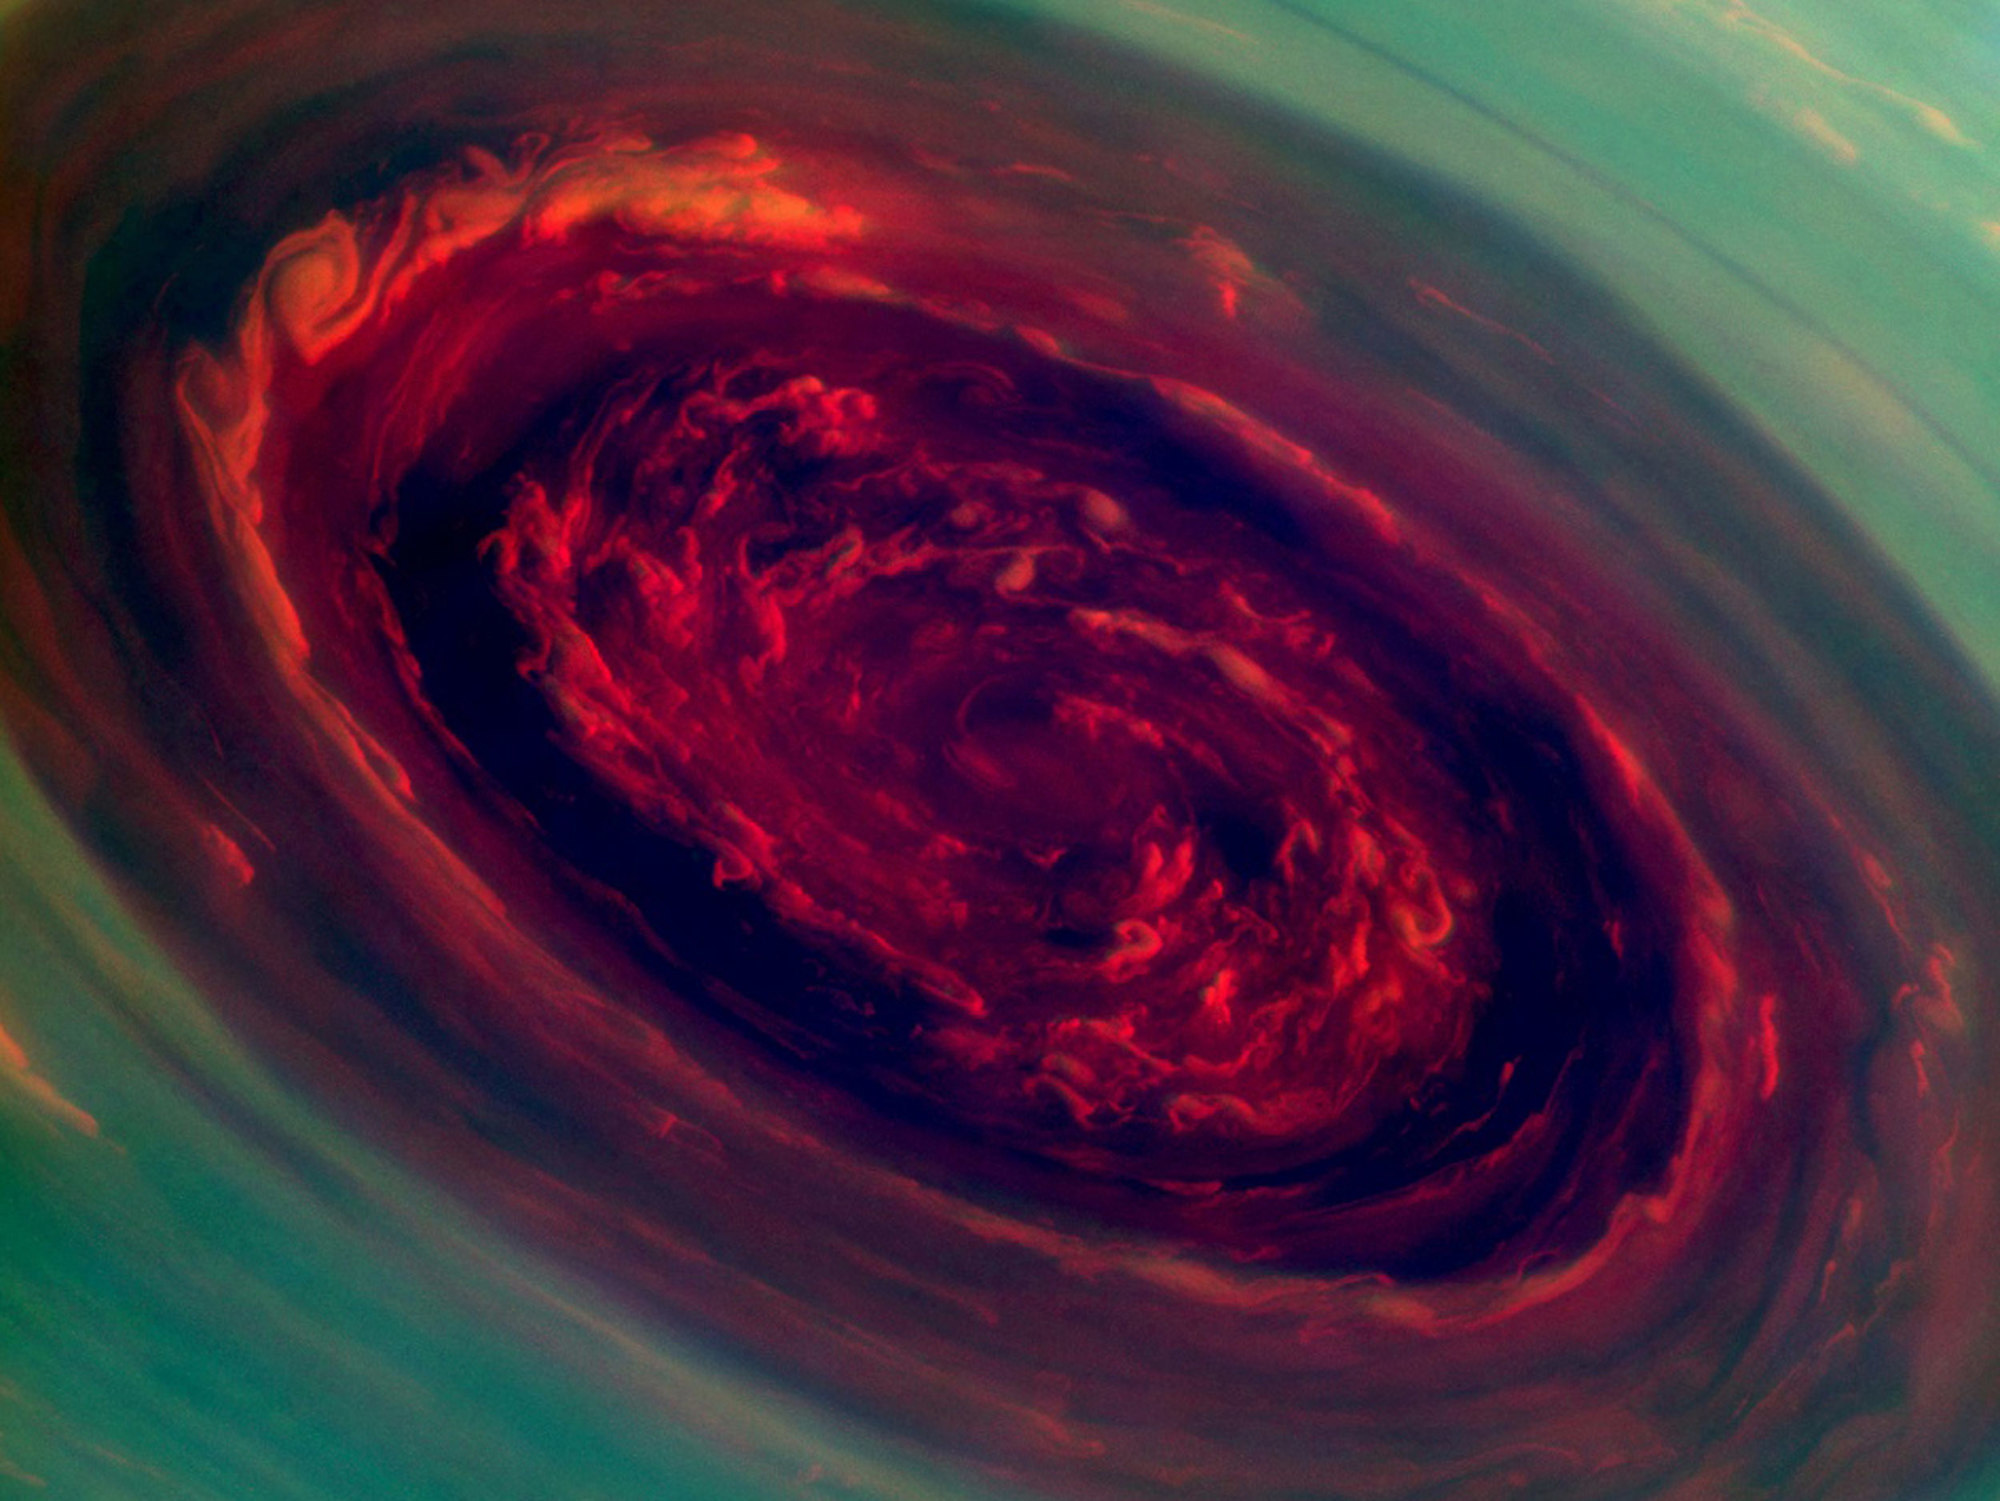 A hurricane on Saturn so big that 2 Earths could fit inside it.